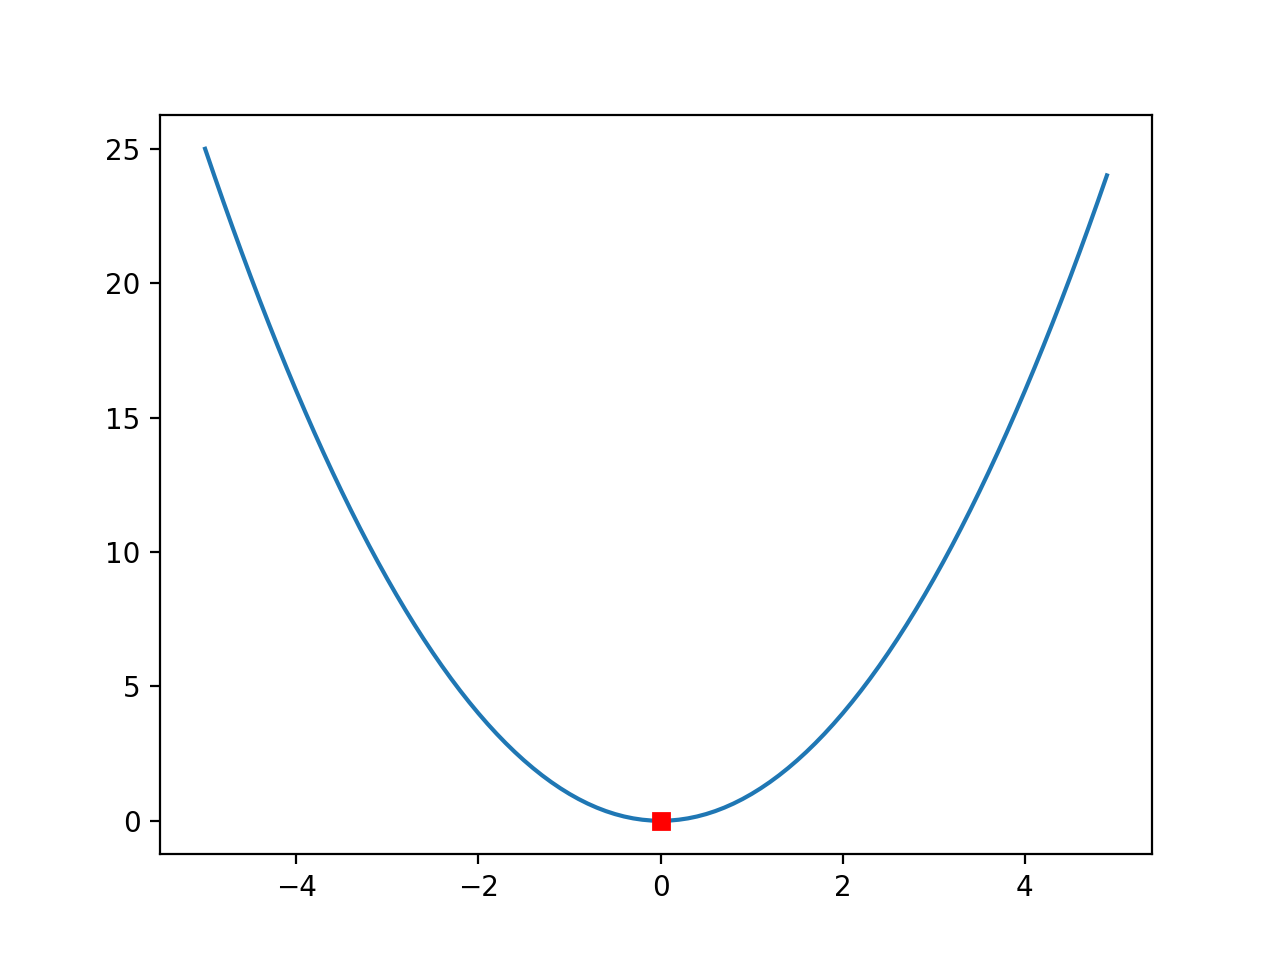 Line Plot of a One-Dimensional Function With Optima Marked by a Red Square